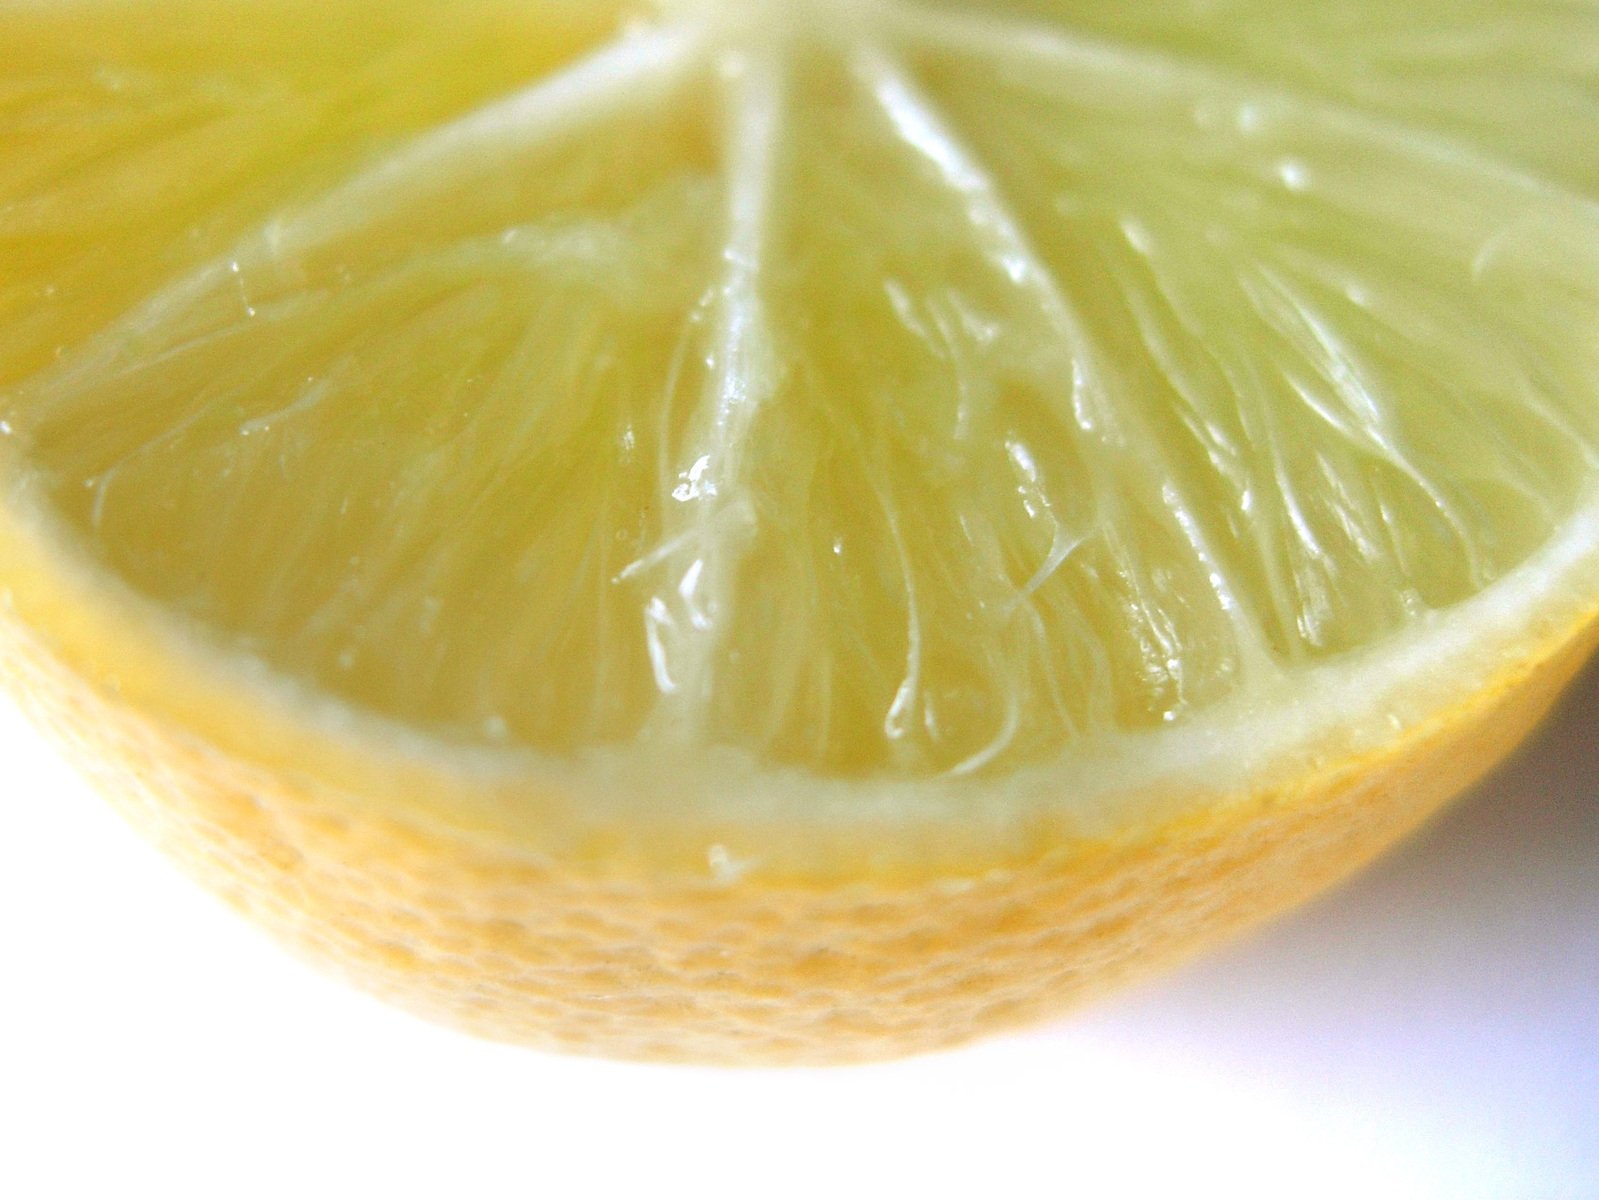 an extreme close up of a lime fruit sliced in half